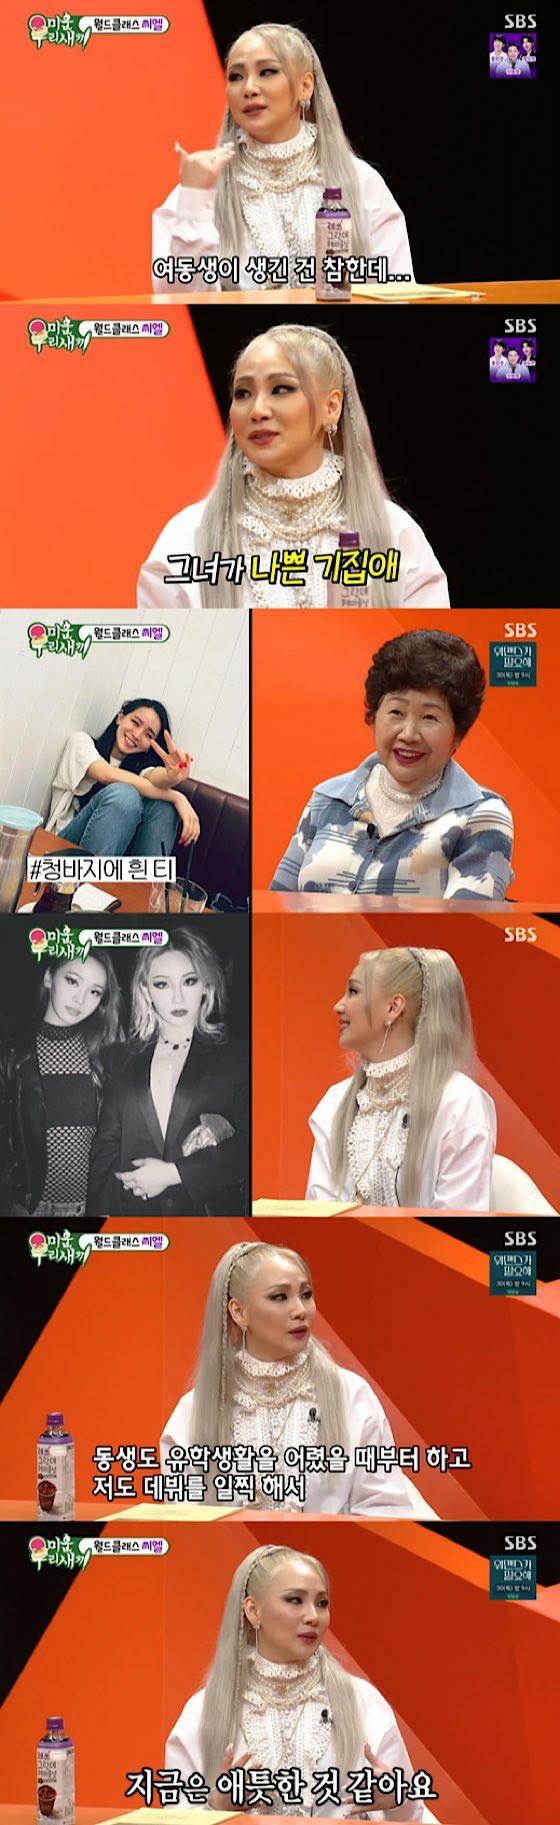 CL (former 2NE1), "My real sister, her face is quiet .. When she makes up, we look like each other."